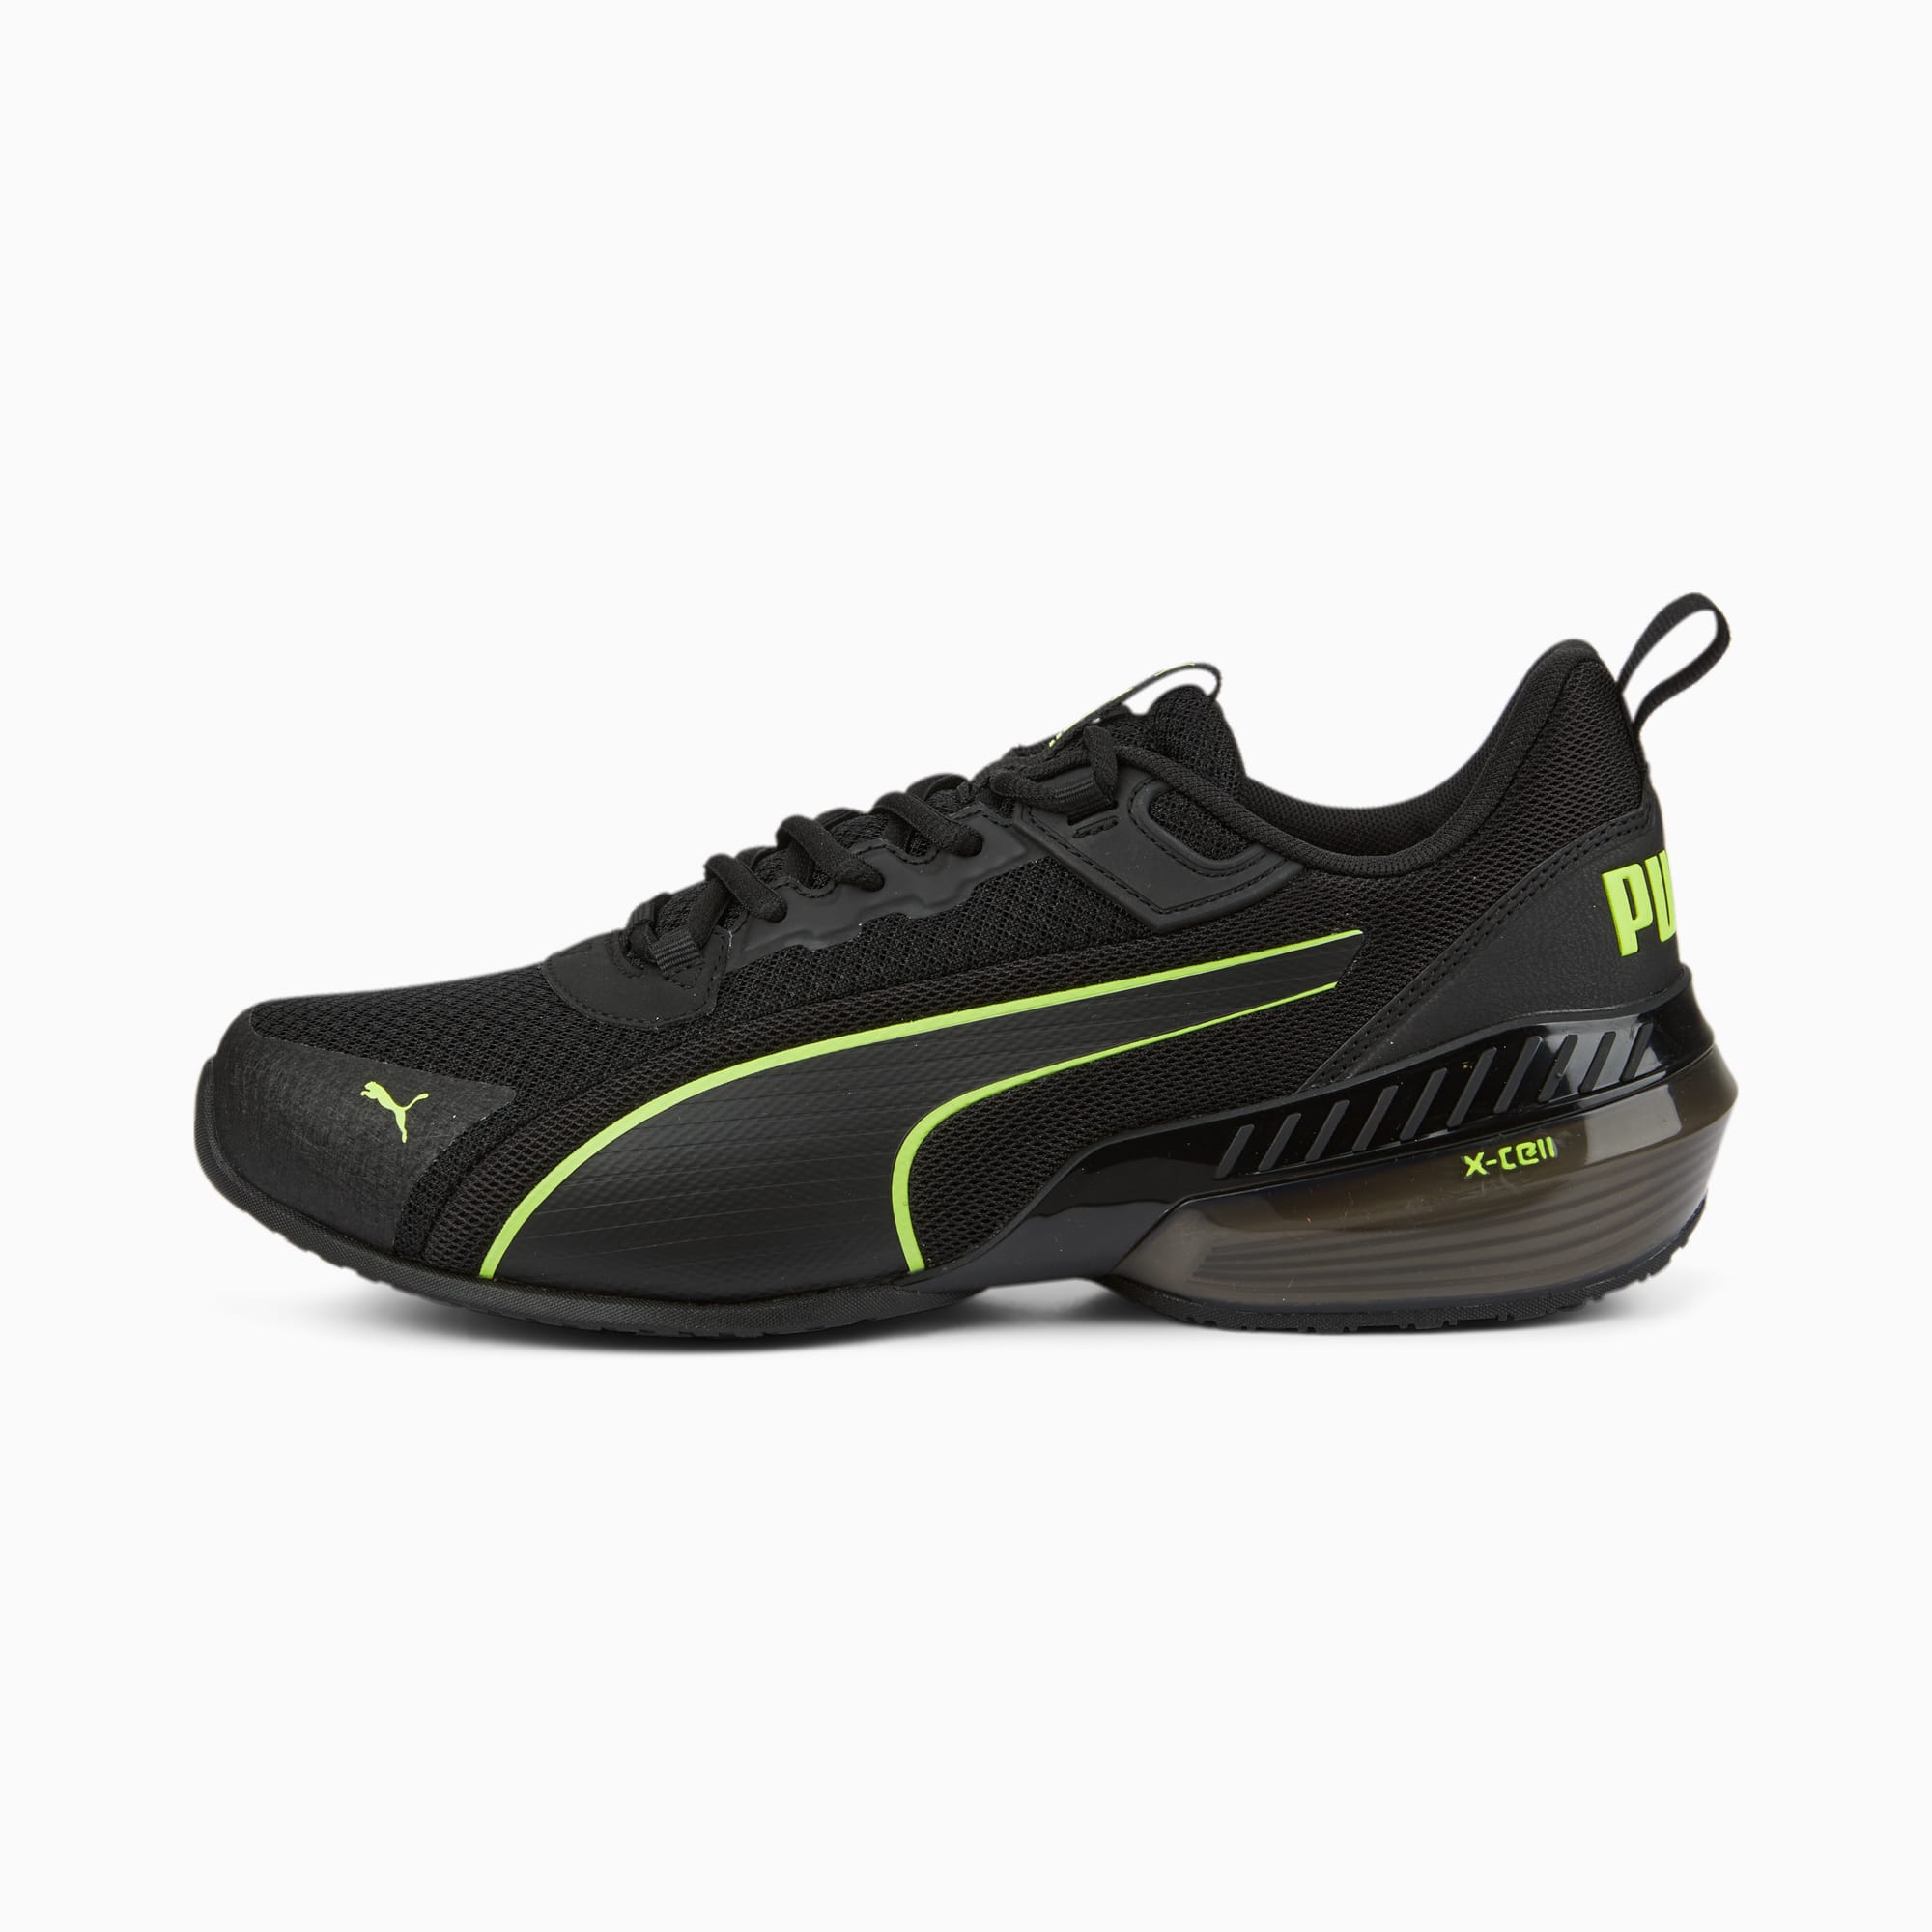 X-CELL Uprise Men's Running Shoes | PUMA